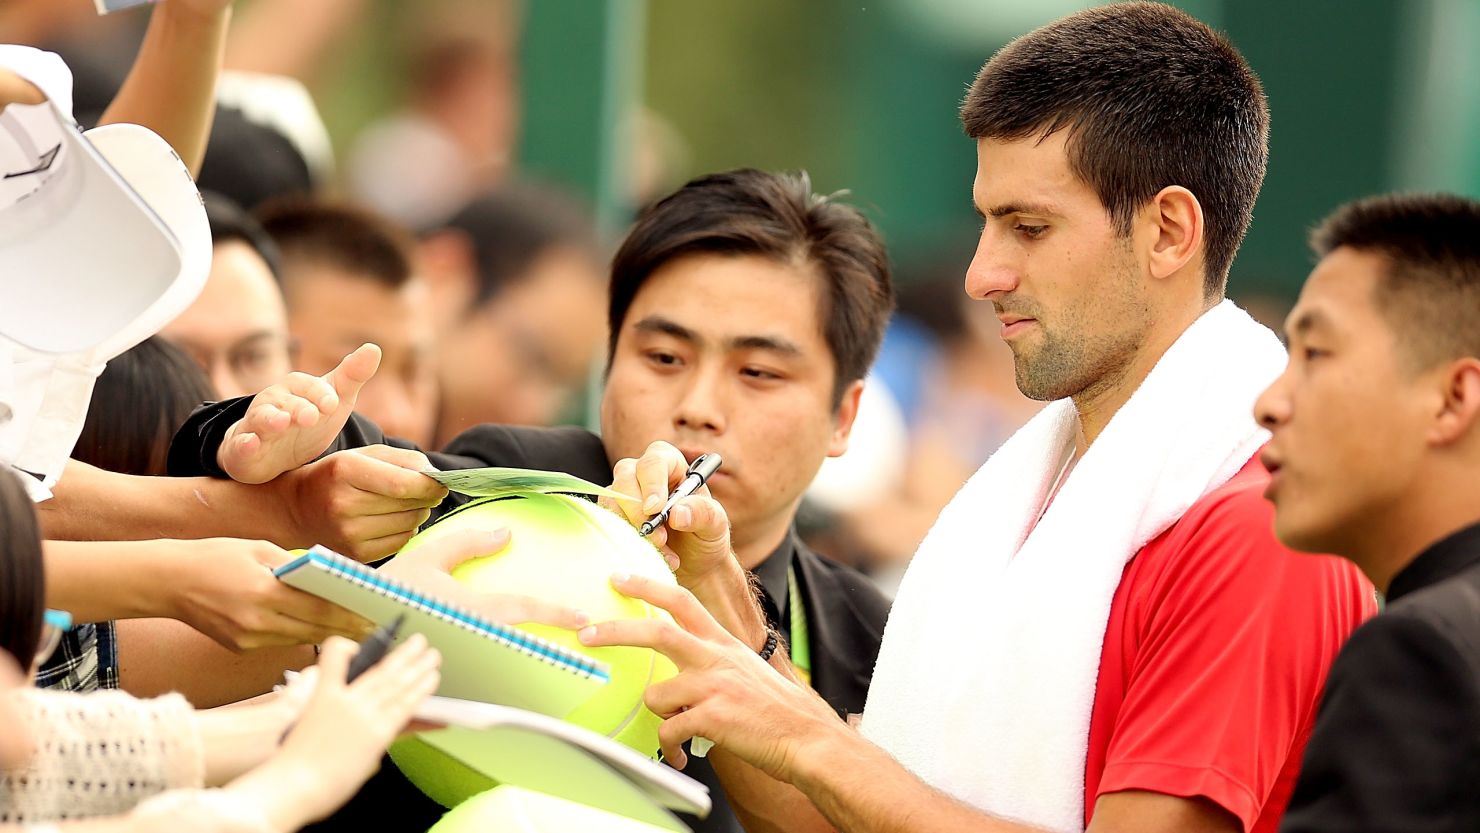 Novak Djokovic is aiming to recapture his world number one ranking at the Shanghai Masters